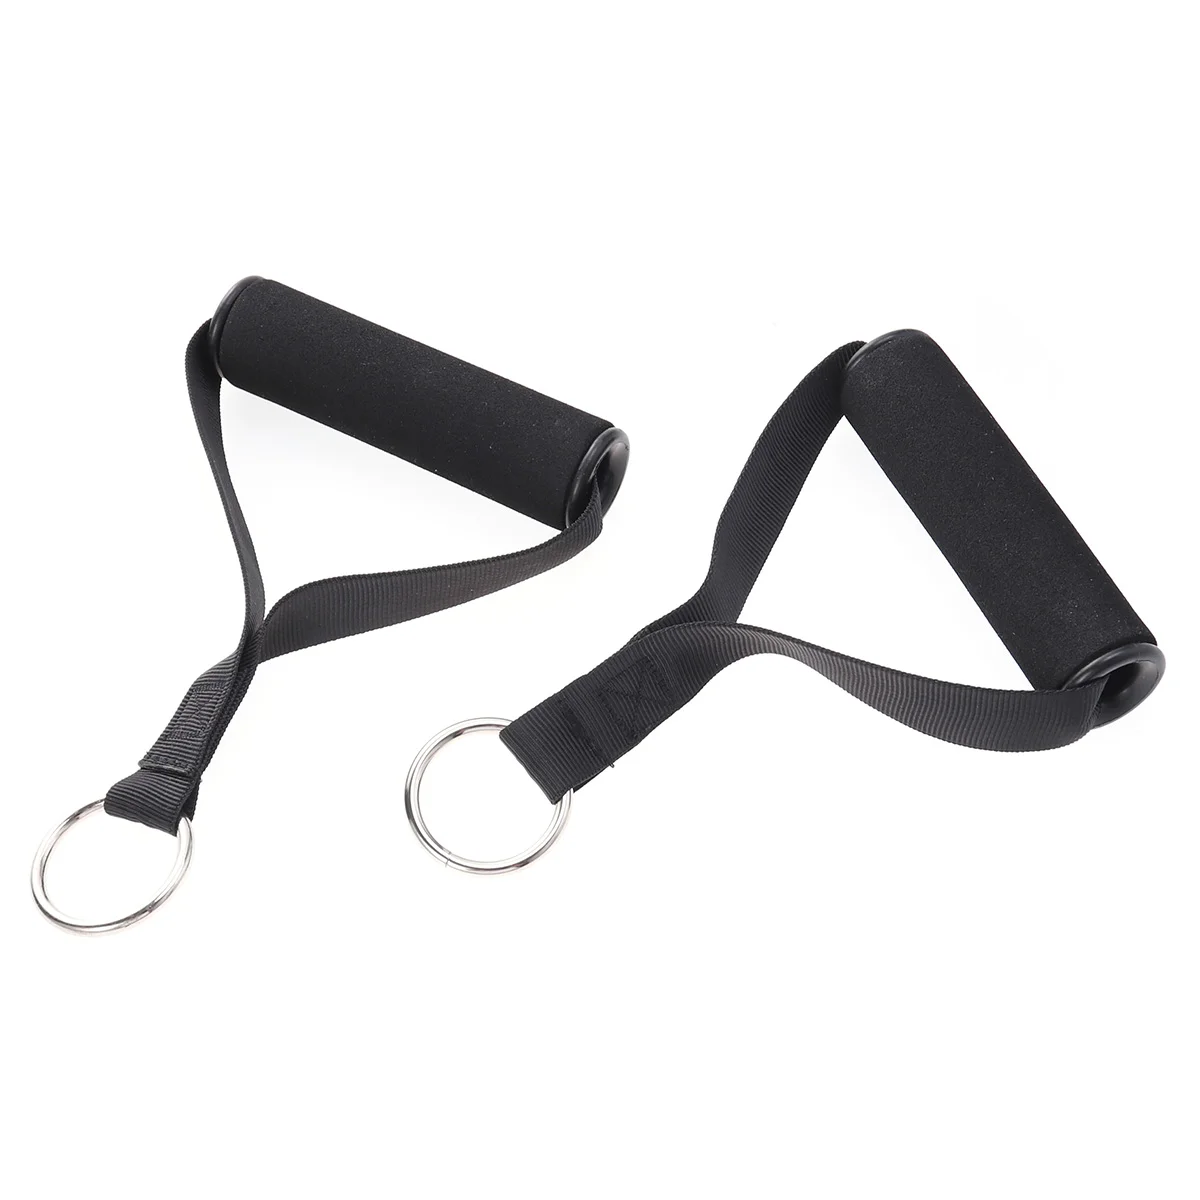 

Fitness Muscle Pulley Hand Athletic Set Resistance Bands Handles Workout Strap Bands Yoga Sets Cable Accessories Stirrup Handle